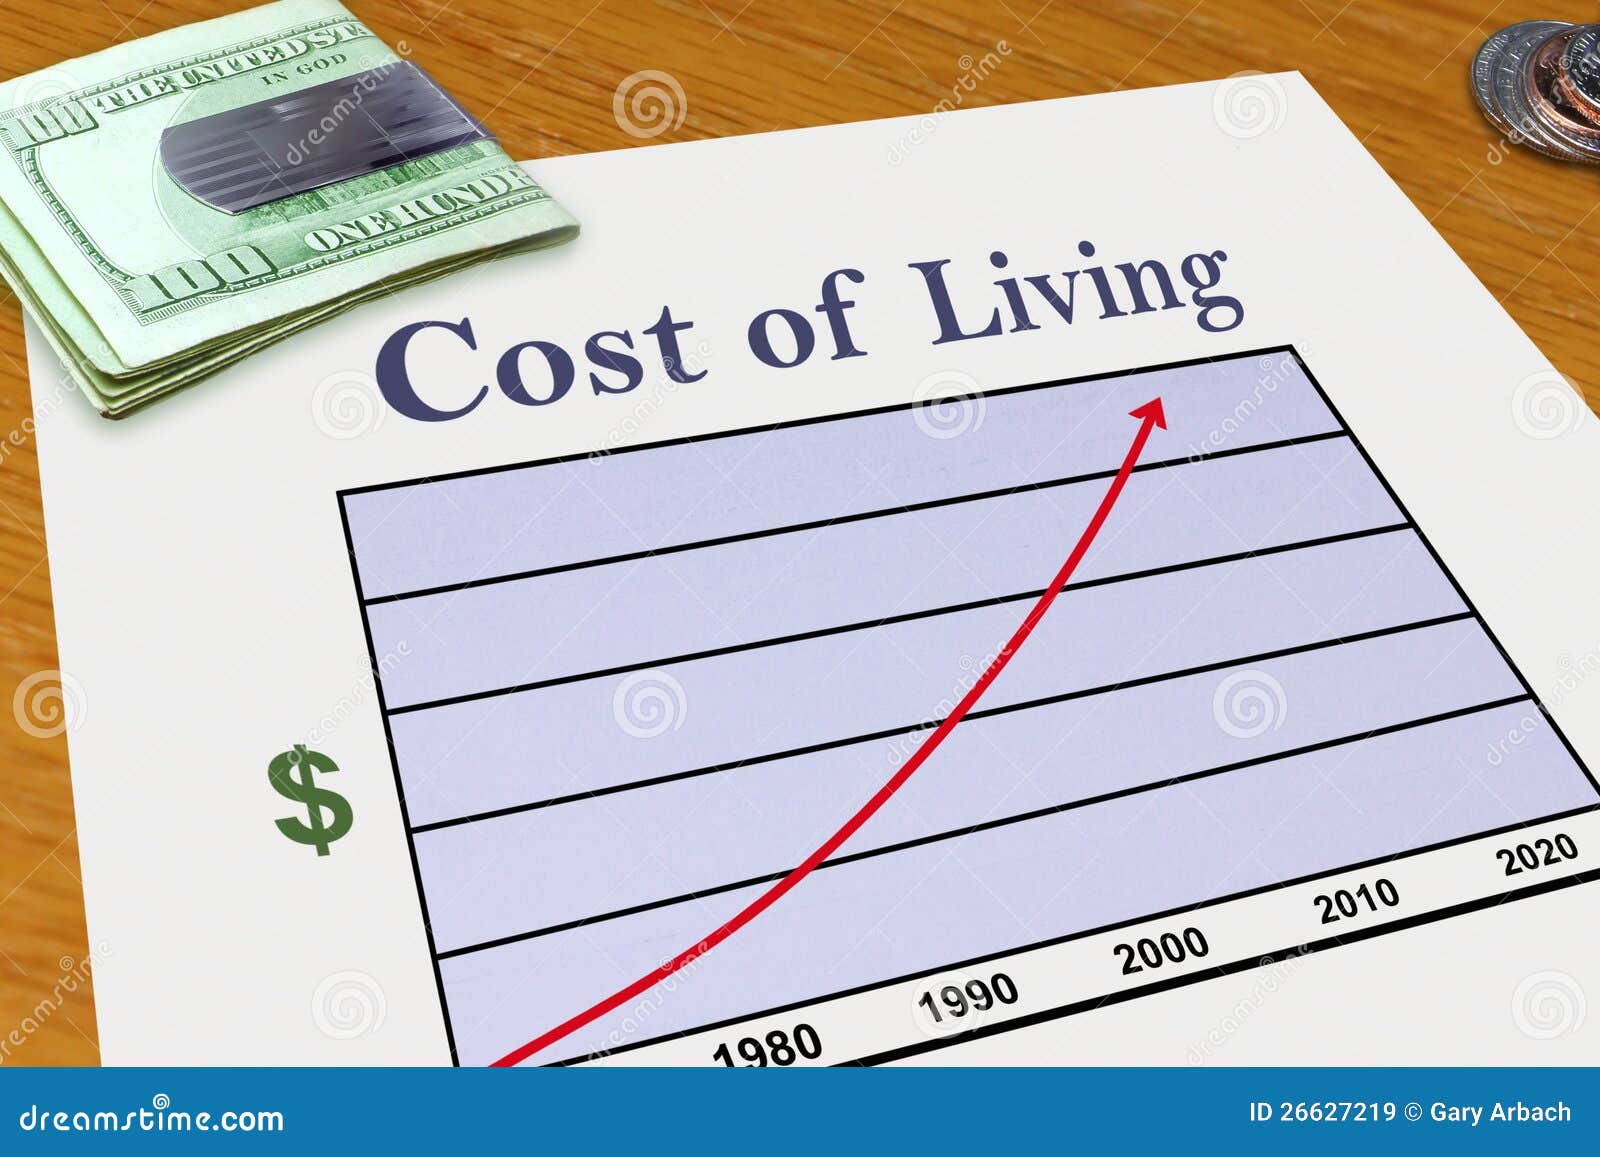 To higher costs in the. Cost of Living. High cost of Living картинка. Reasonable cost of Living. Картинки на прозрачном фоне High cost of Living.